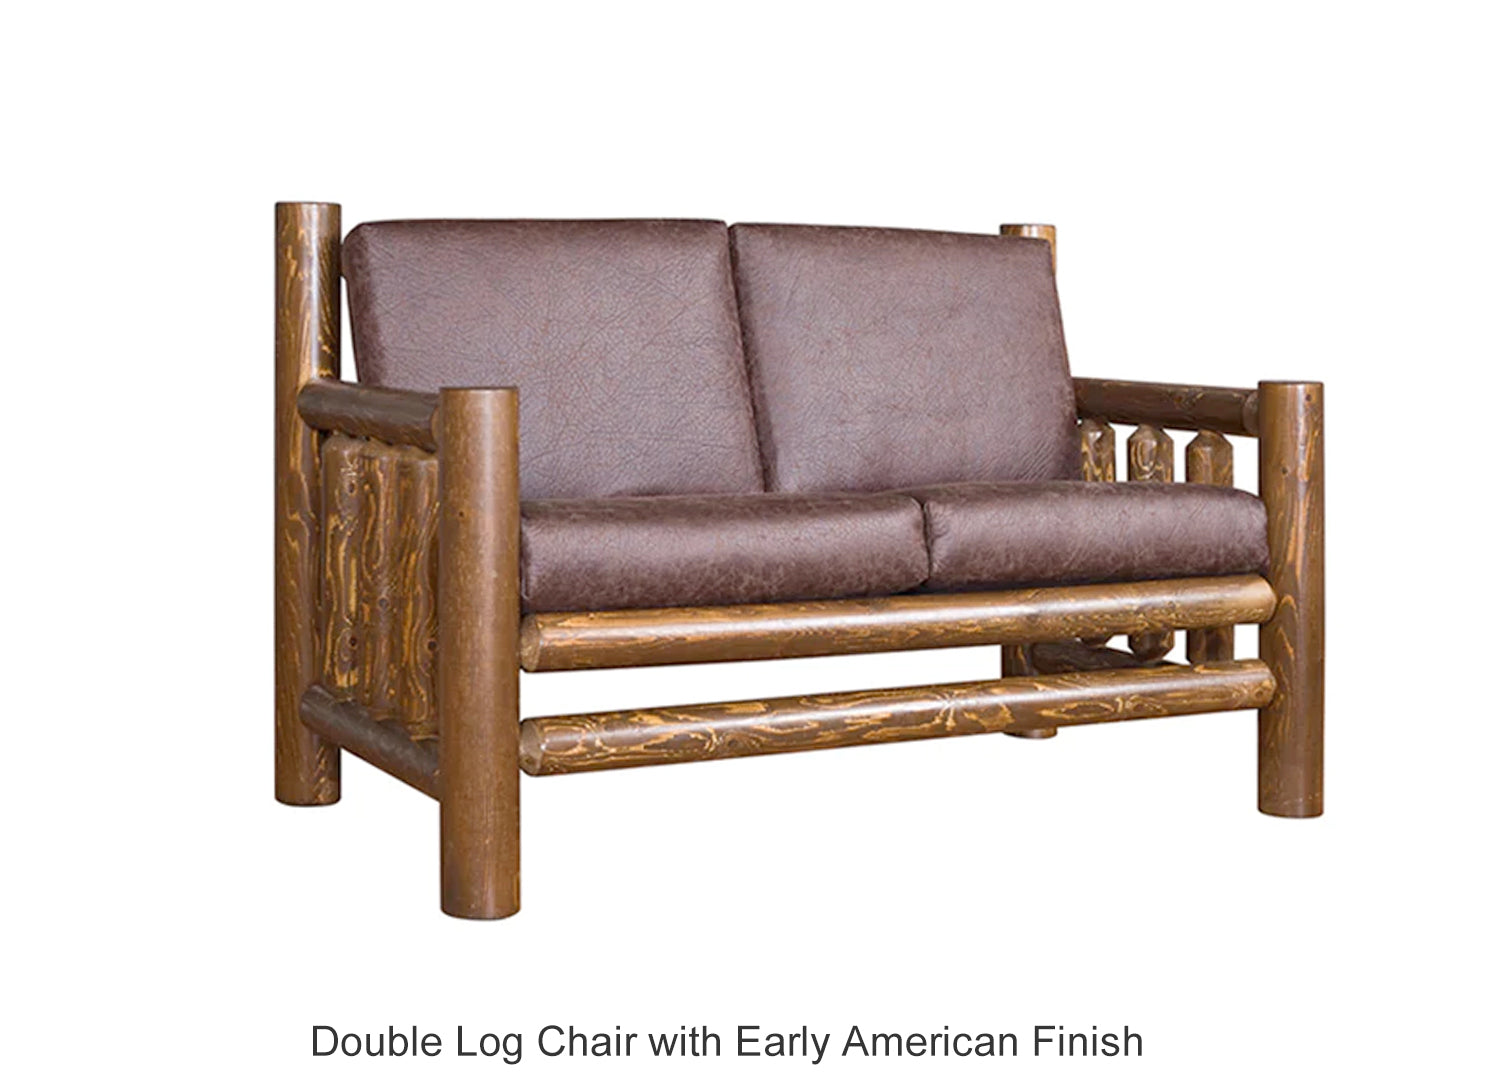 Double Log Chair with Early American Finish